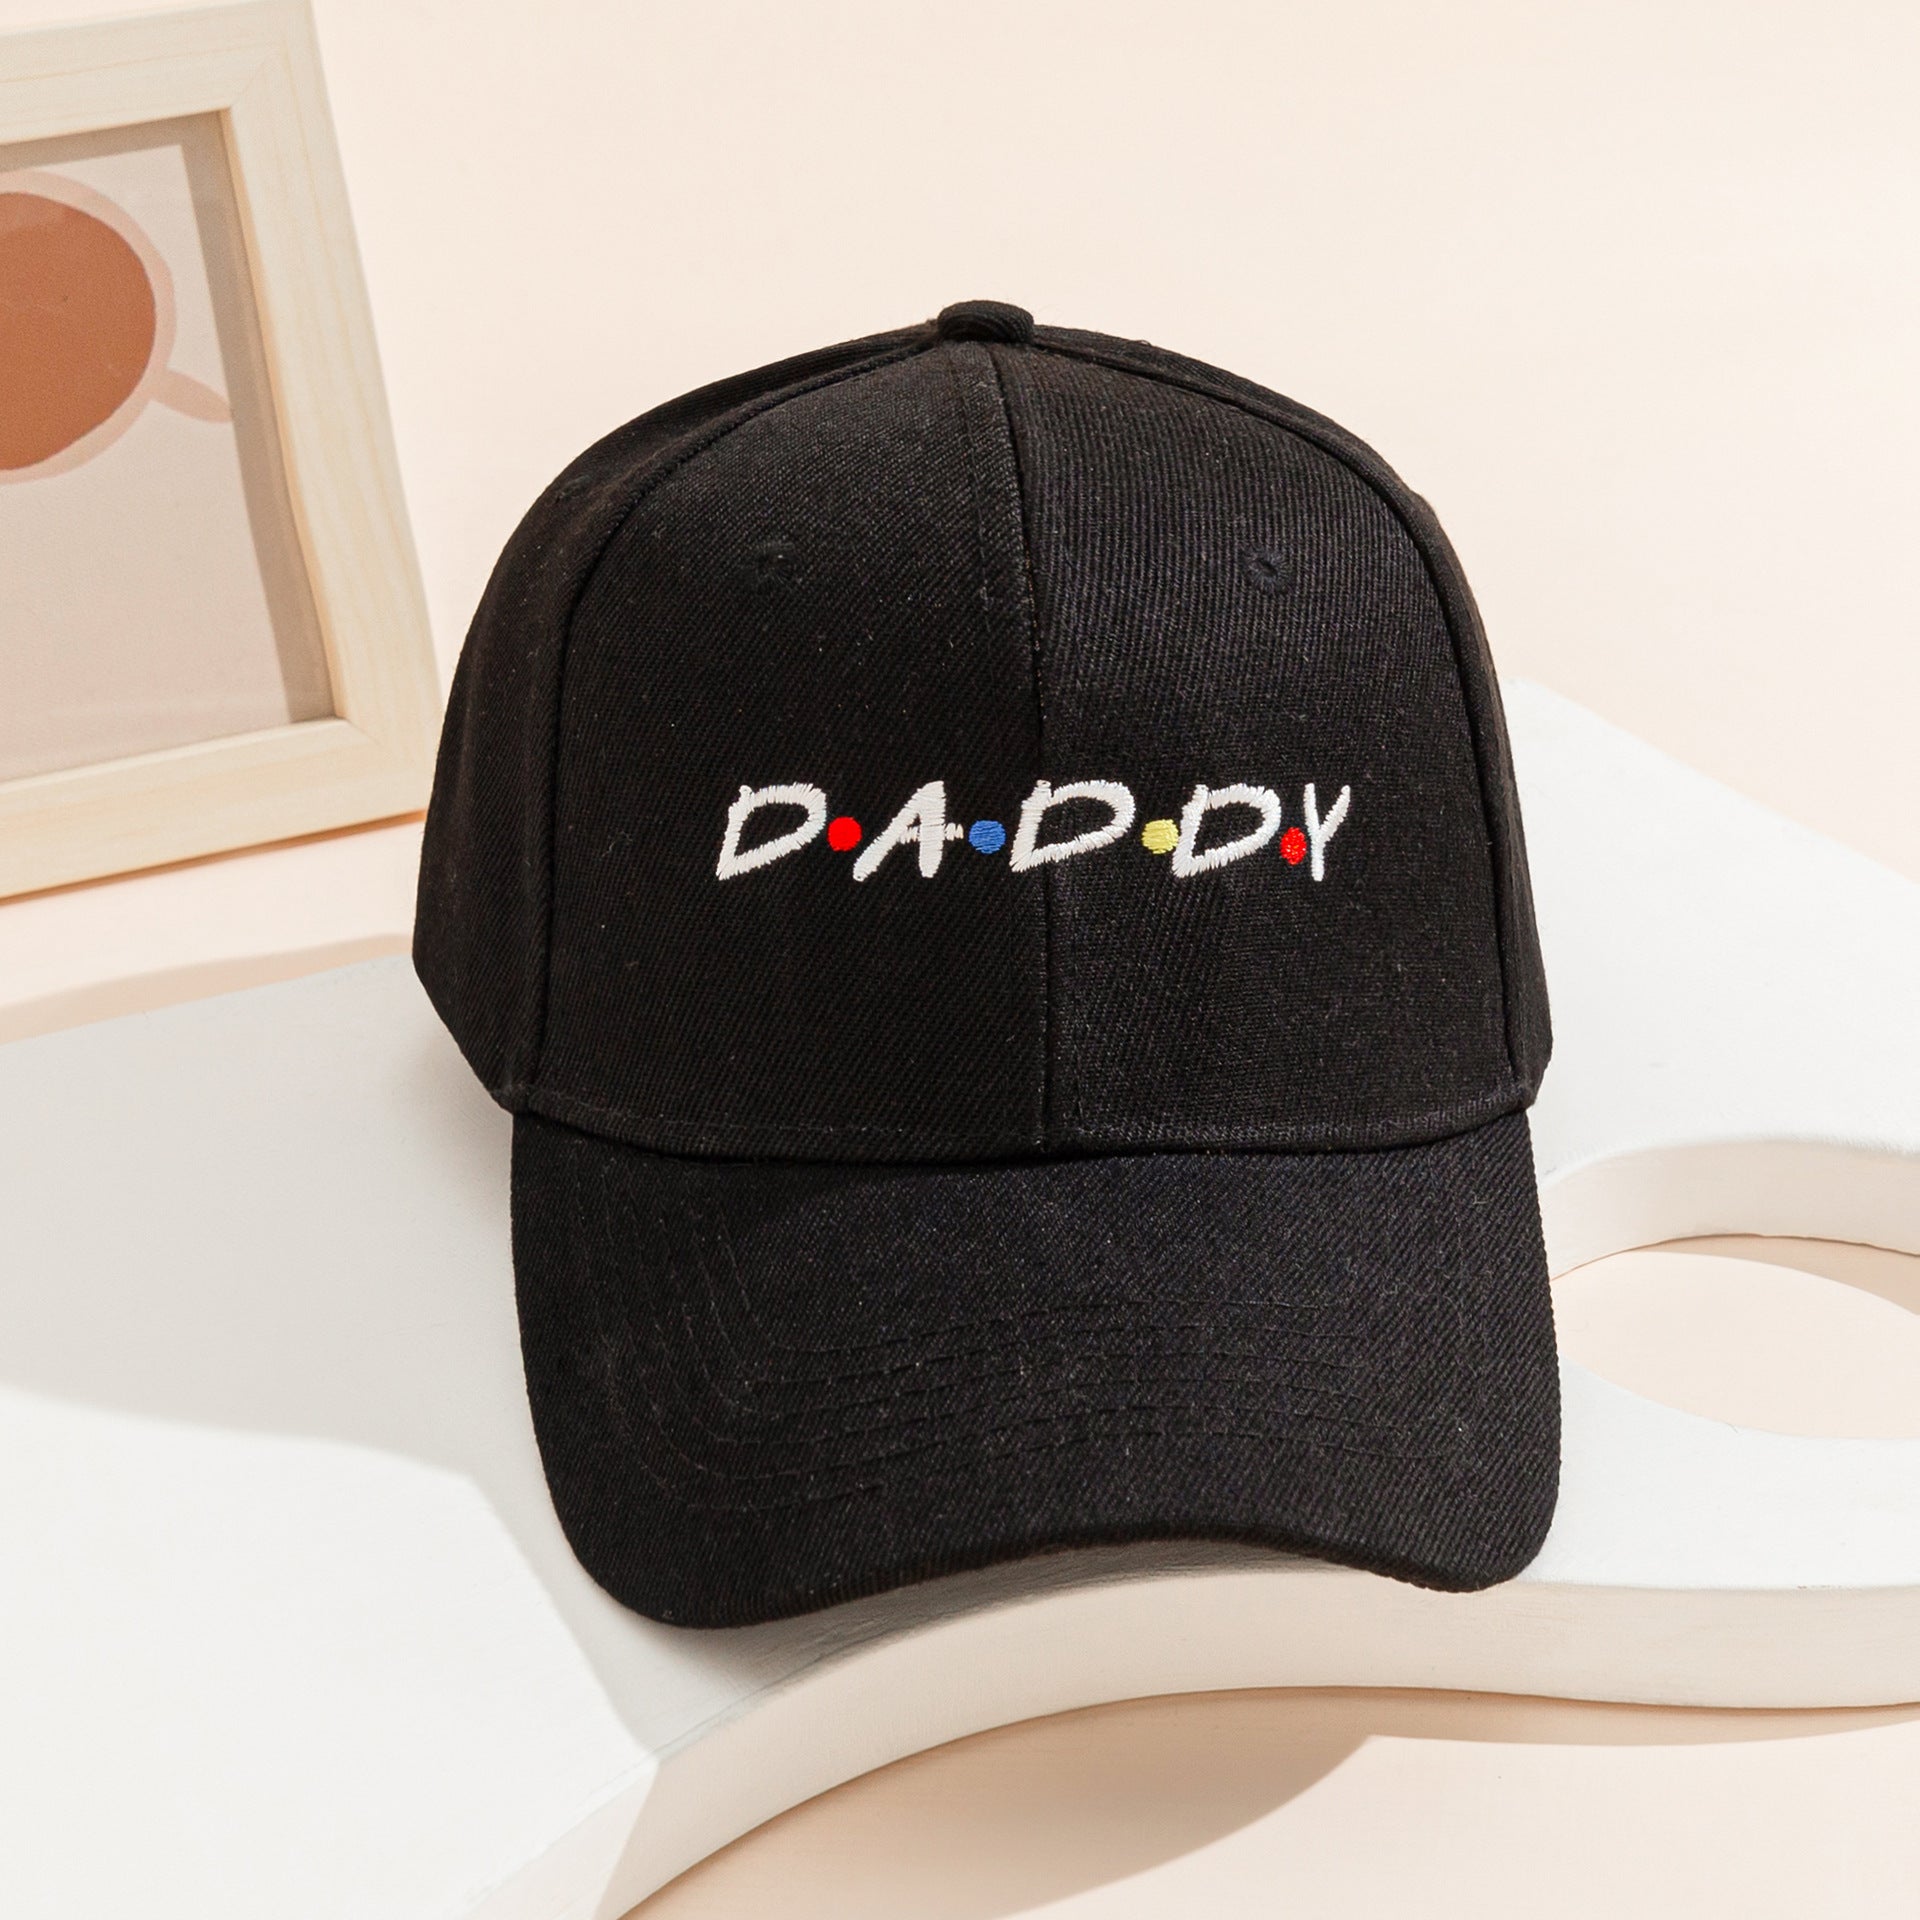 Letter Embroidery Parent-child Hat Velcro Adjustment Casual Sun-proof